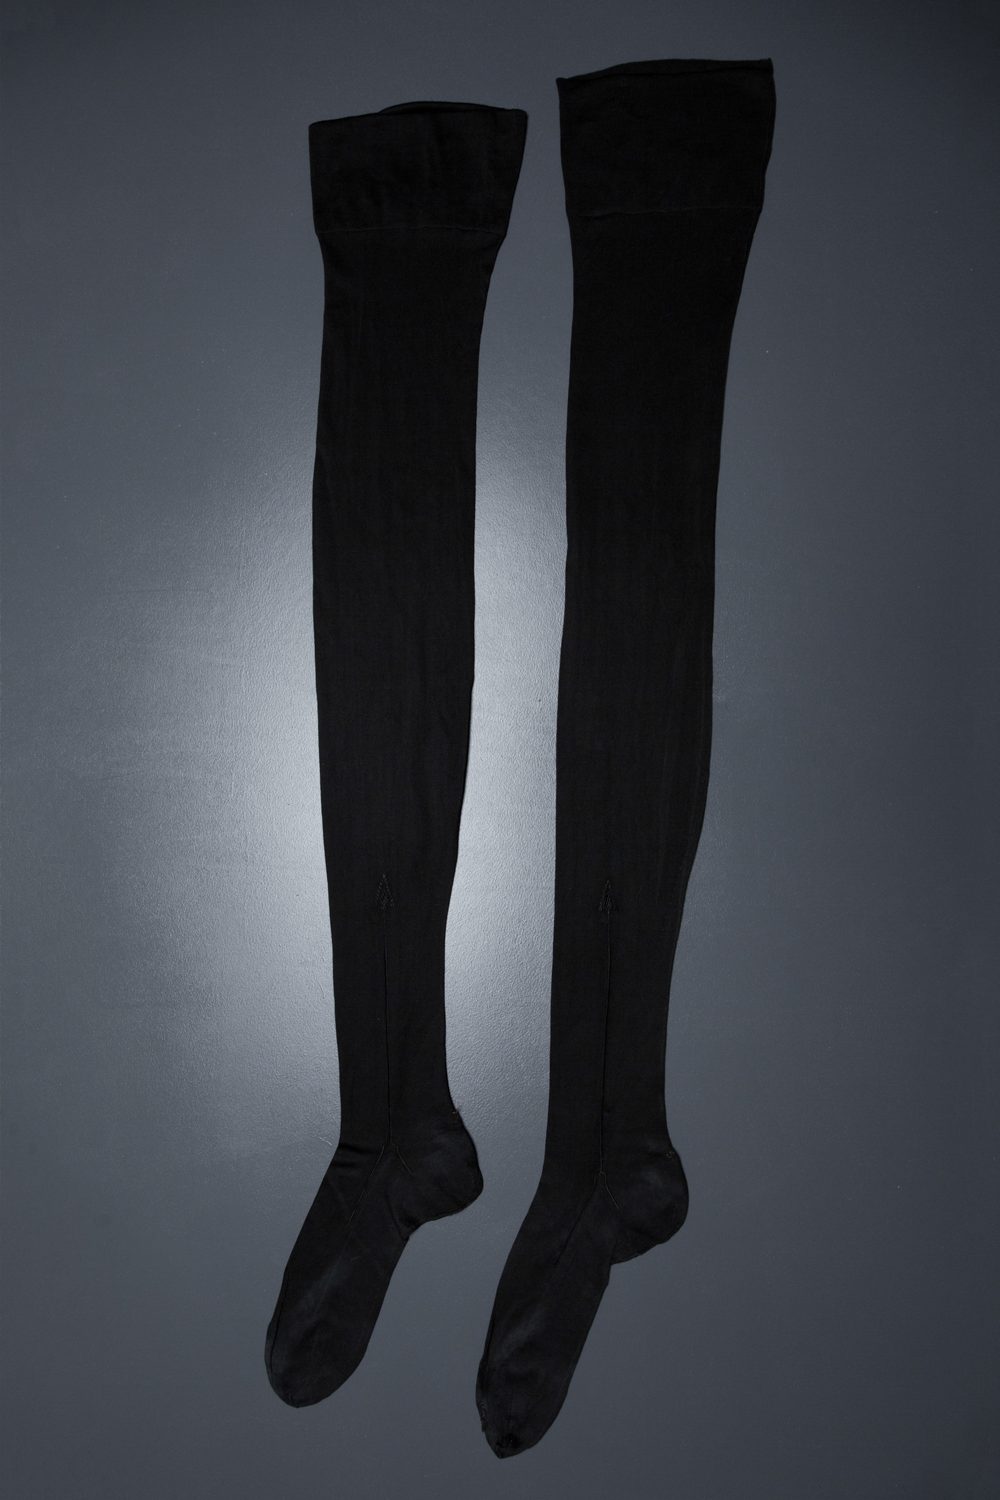 Black silk stockings, purchased with black Silk Underbust Corset With Suspenders & Ribbonwork by Corsets "Guy", c. 1920s, France. The Underpinnings Museum. Photography by Tigz Rice.